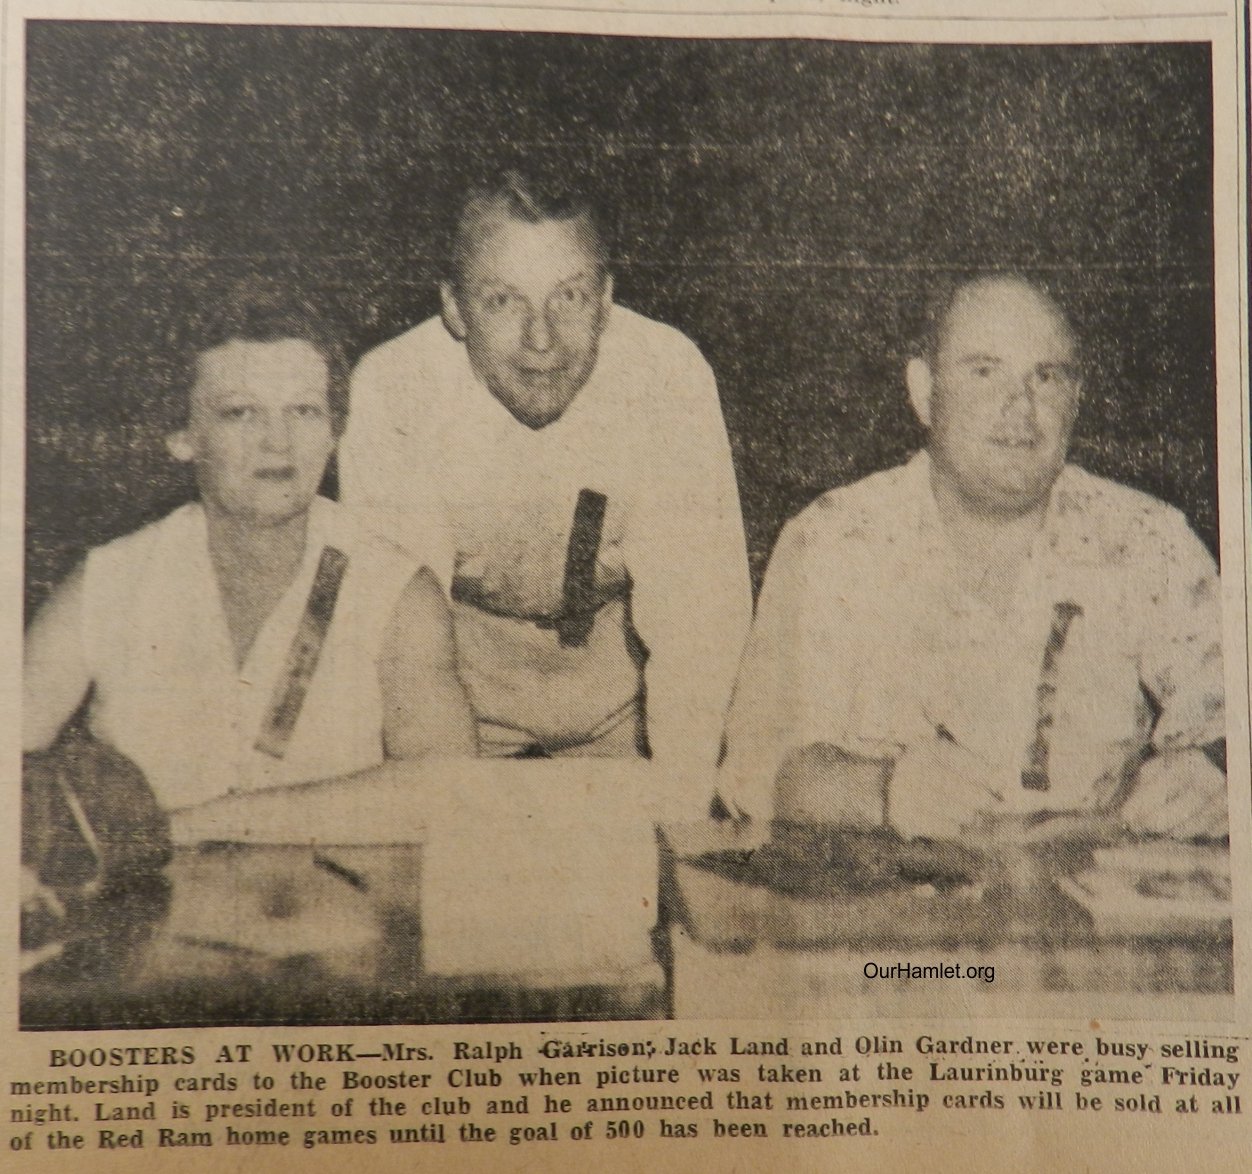 1955 HHS Boosters at work OH.jpg